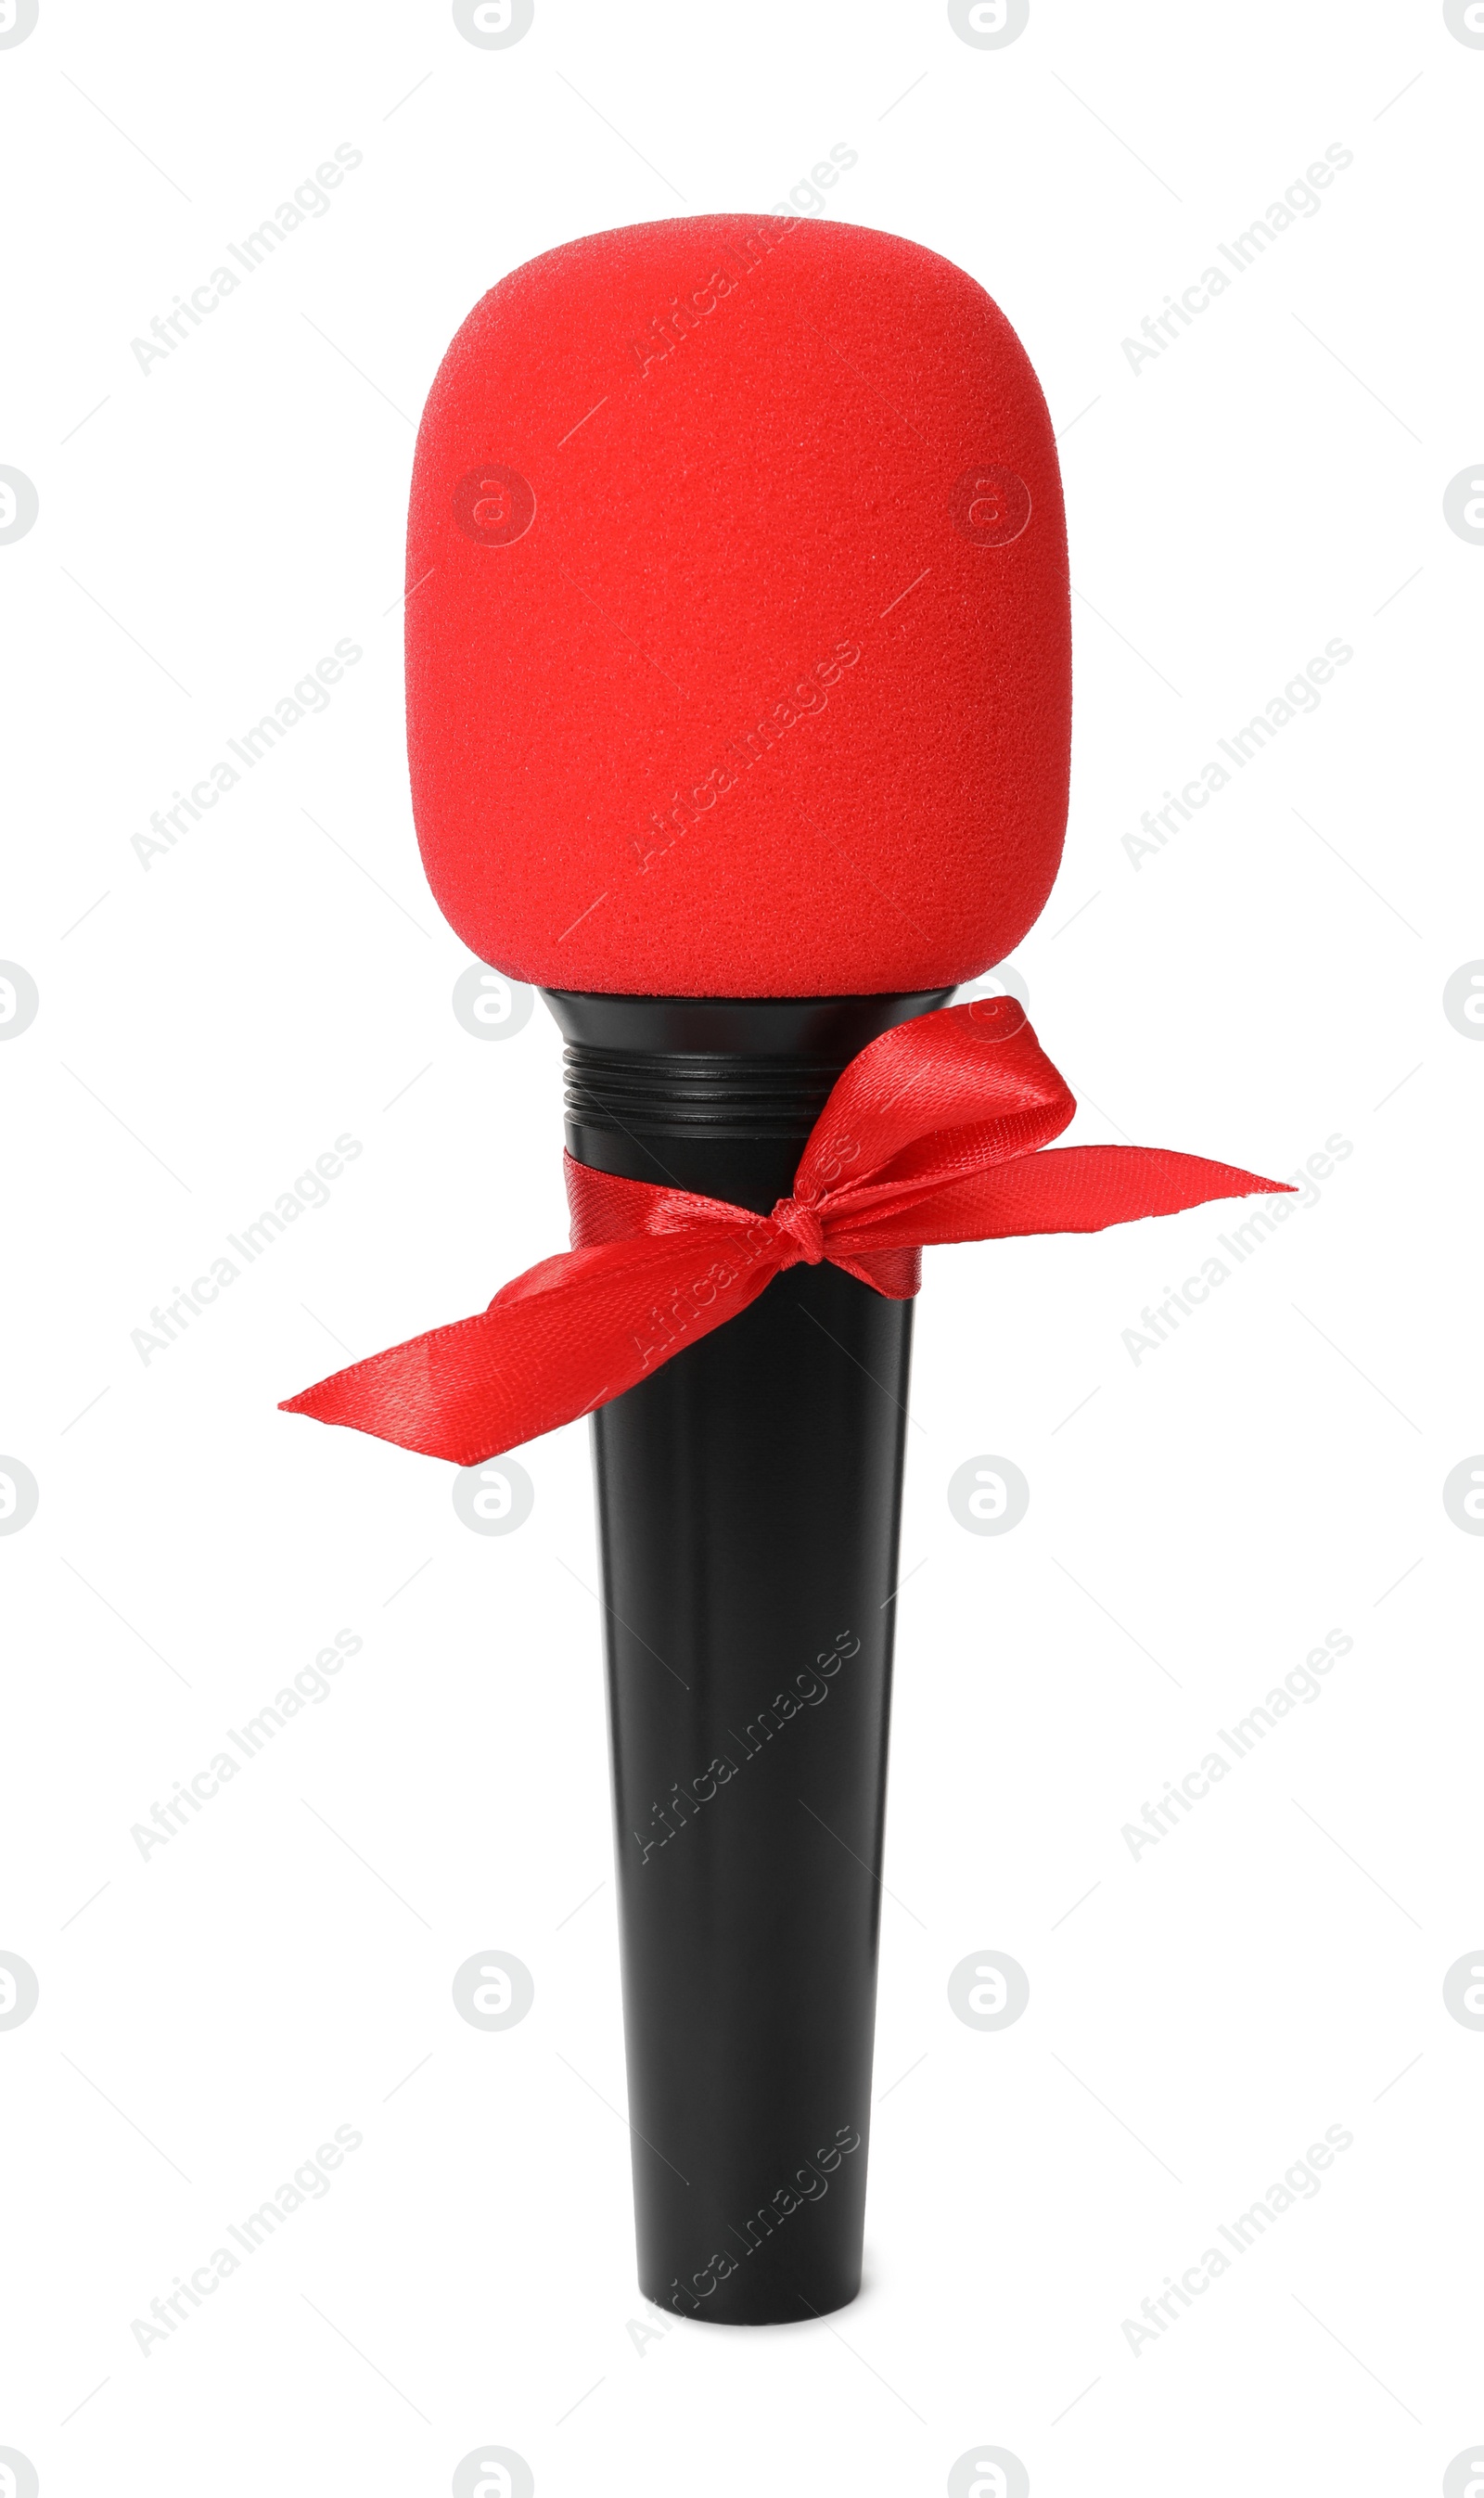 Photo of Microphone with red bow isolated on white. Christmas music